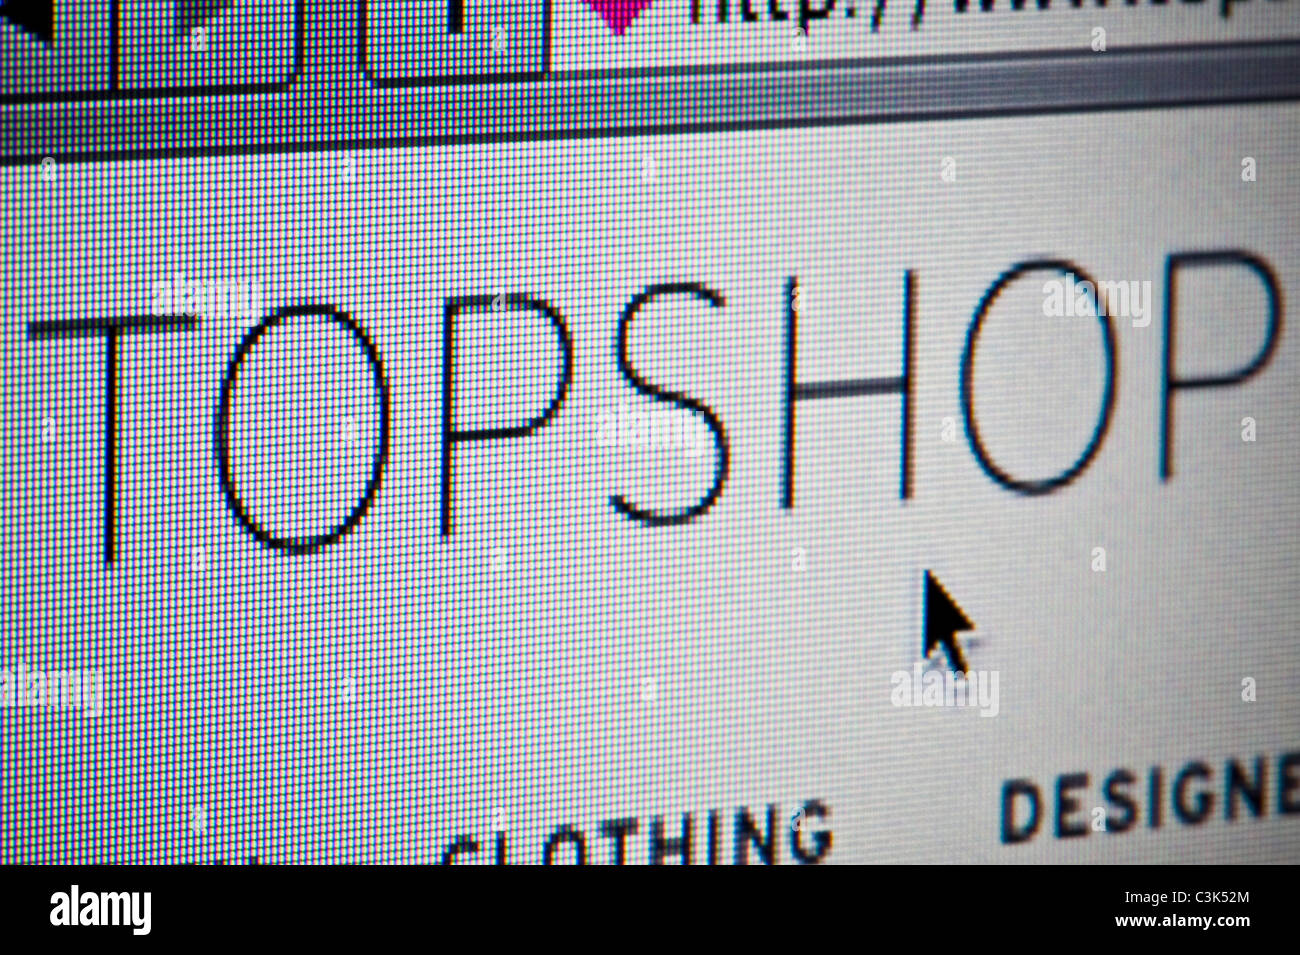 Topshop Logo High Resolution Stock Photography and Images - Alamy